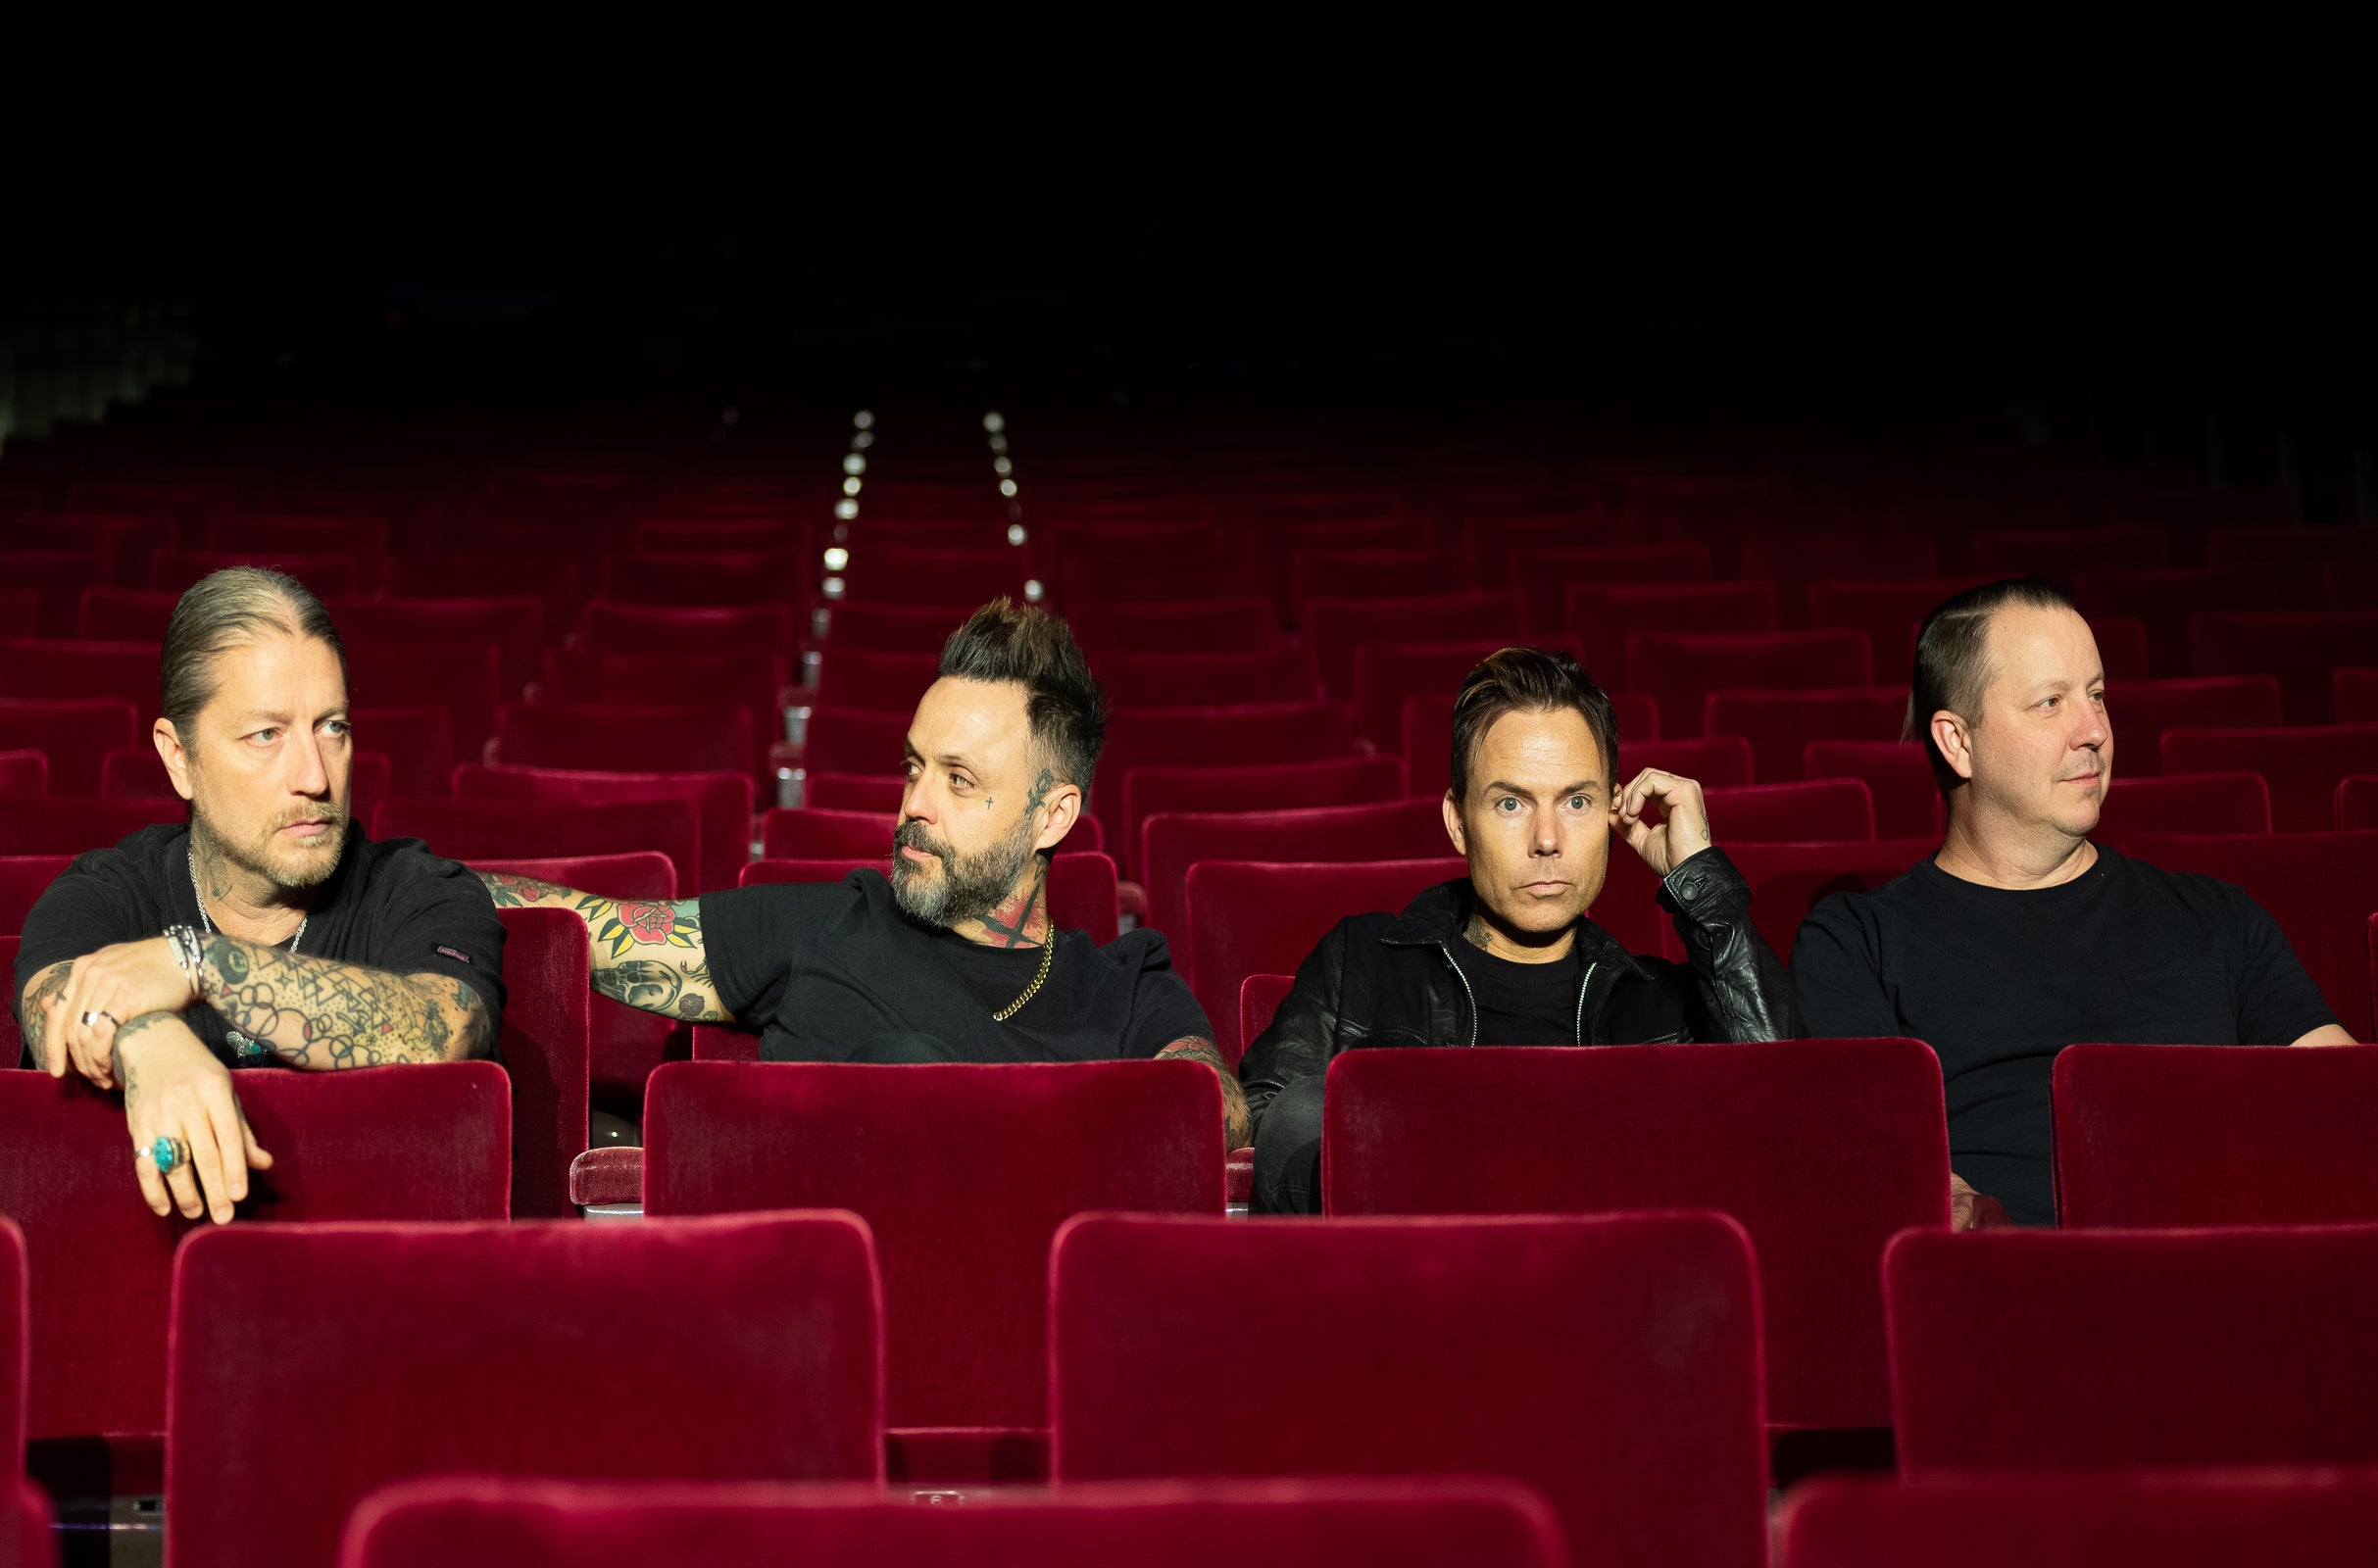 presale c0de for Blue October tickets in Cleveland - OH (TempleLive Cleveland Masonic)